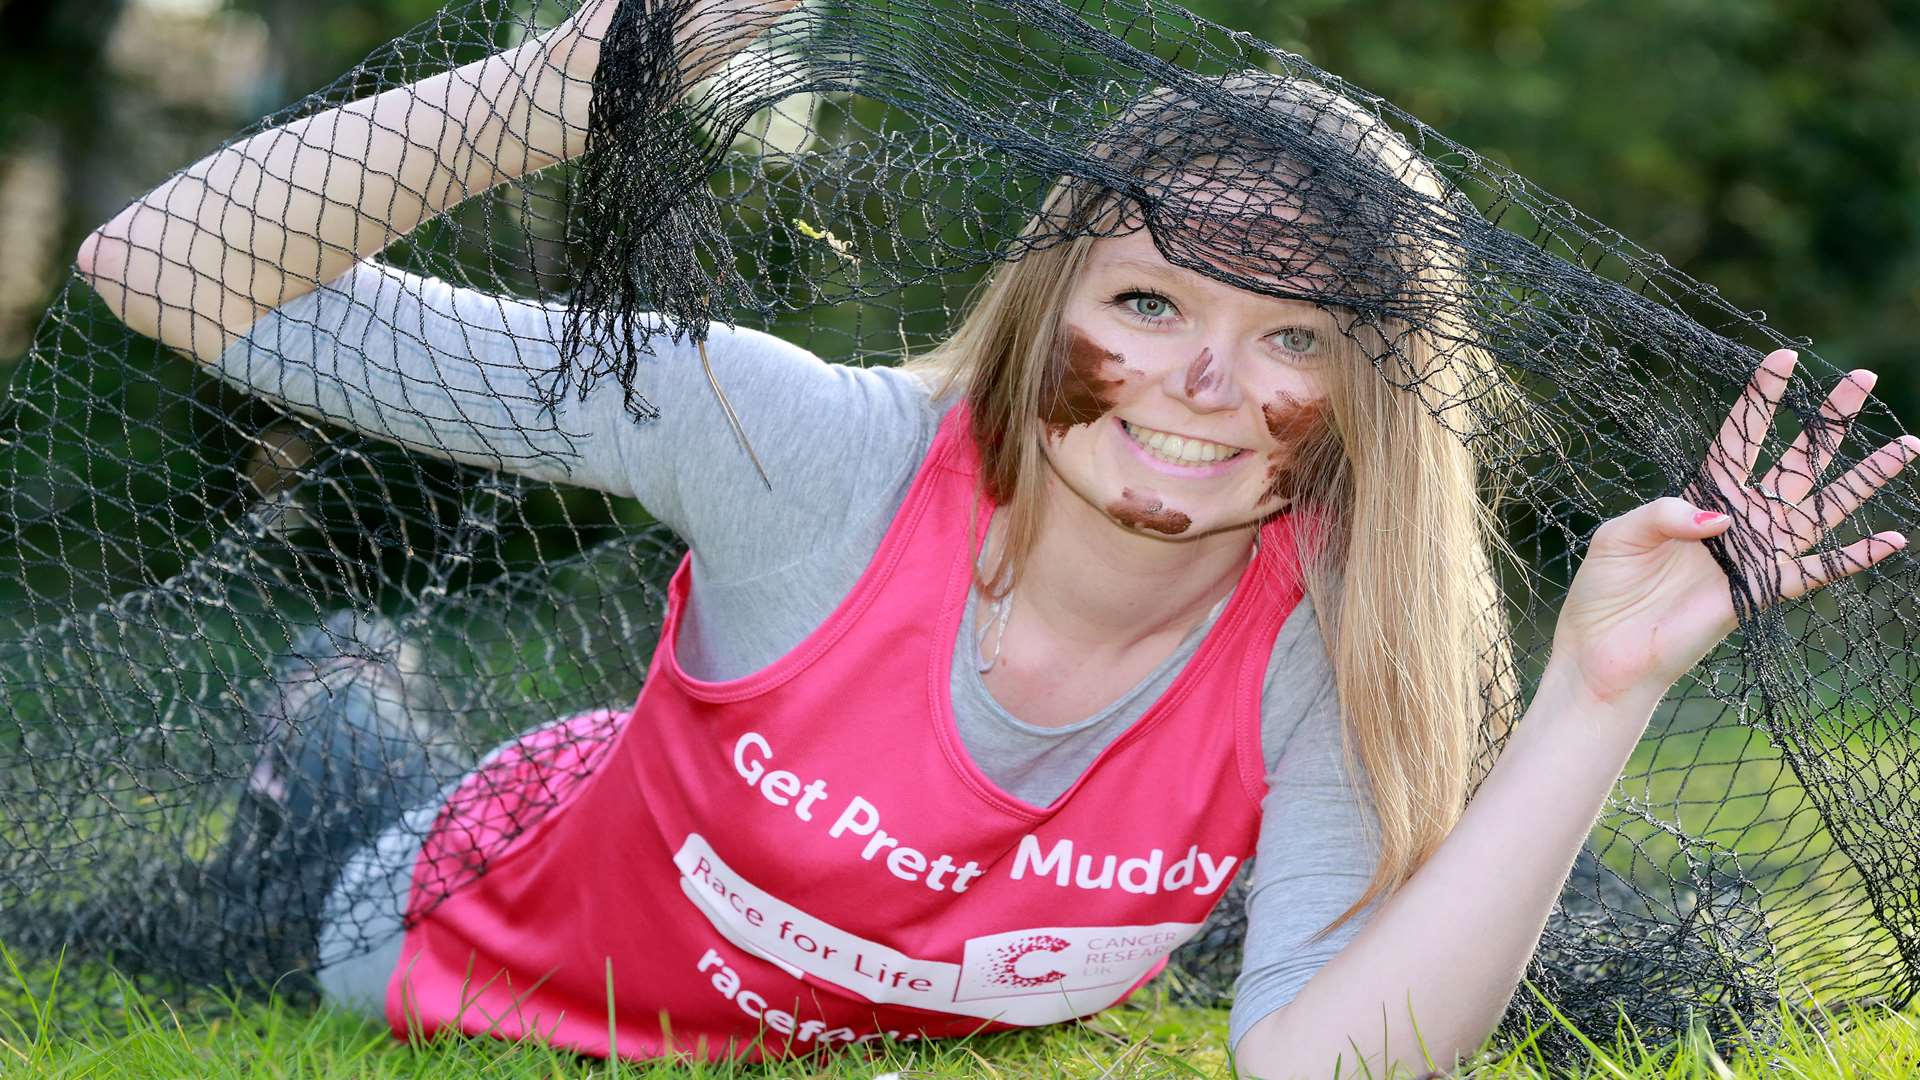 Linzi Radwell is taking part in Cancer Research UK's Pretty Muddy challenge